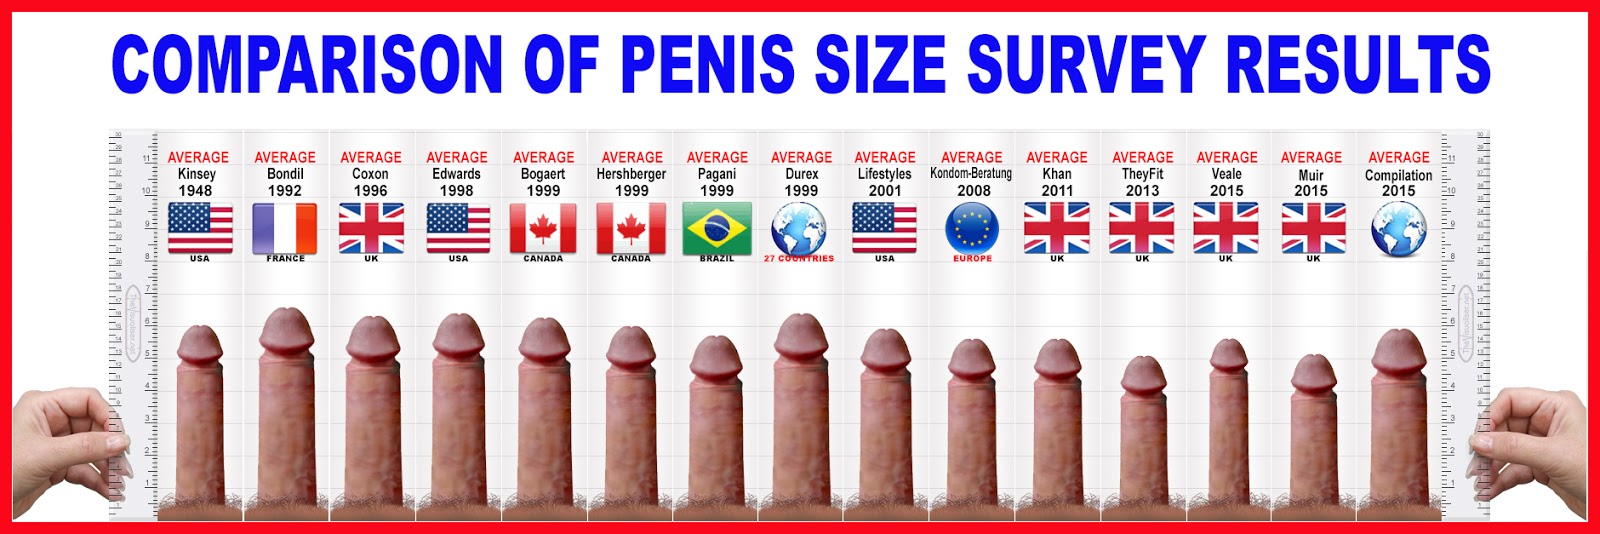 Small penis compilation